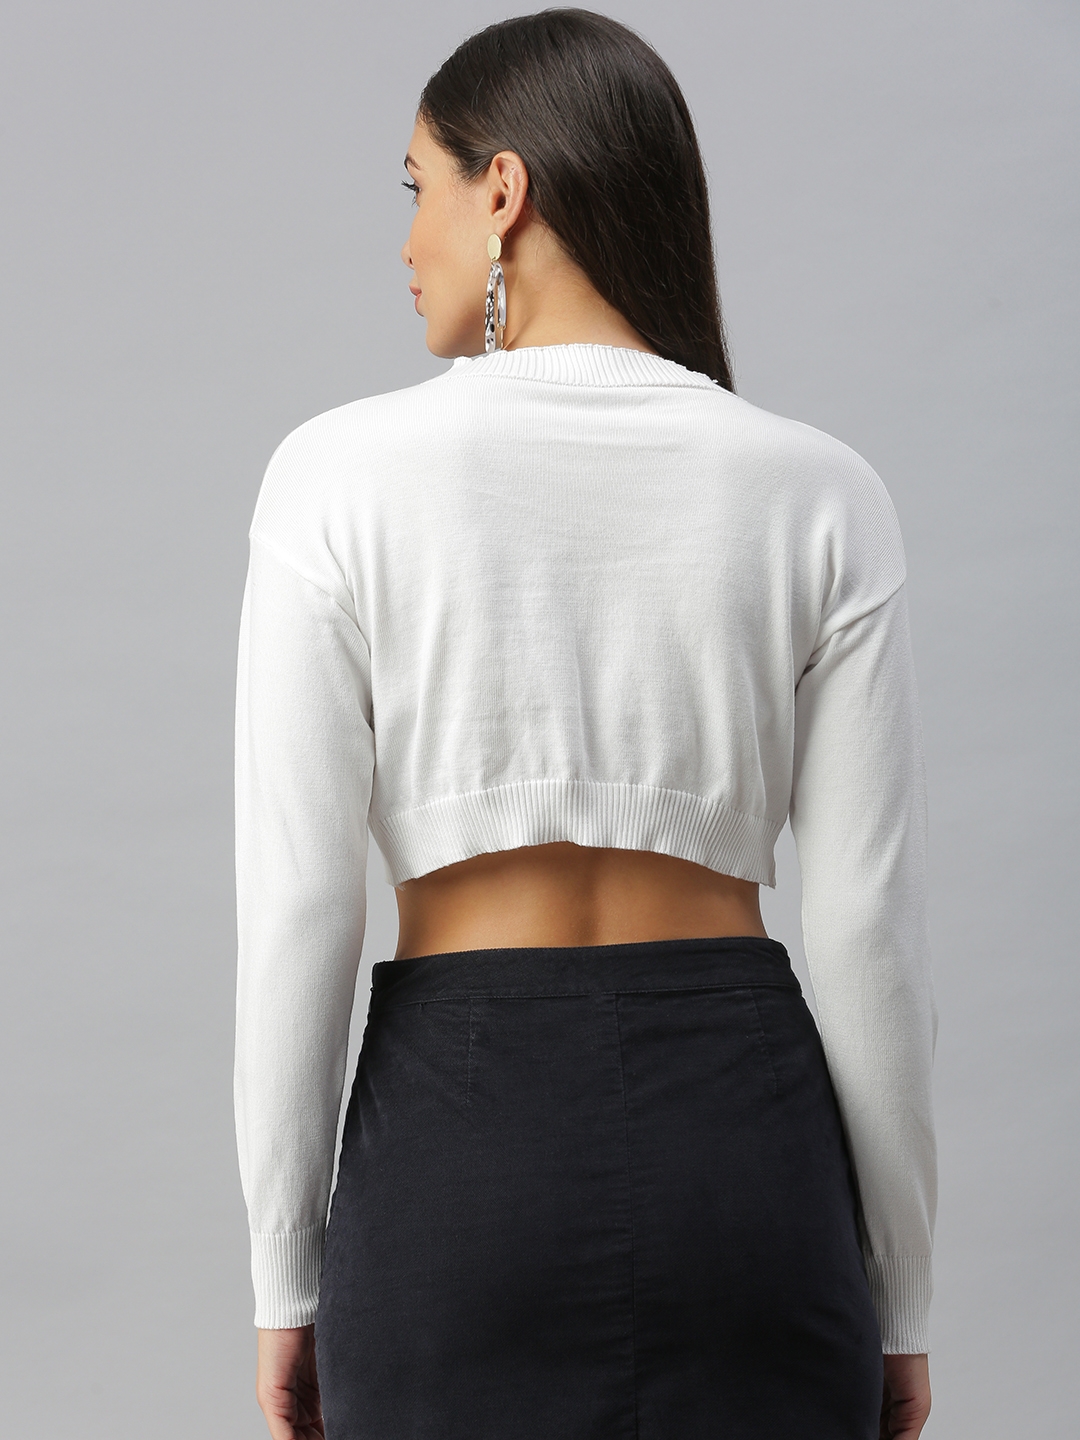 Women's White Acrylic Solid Tops